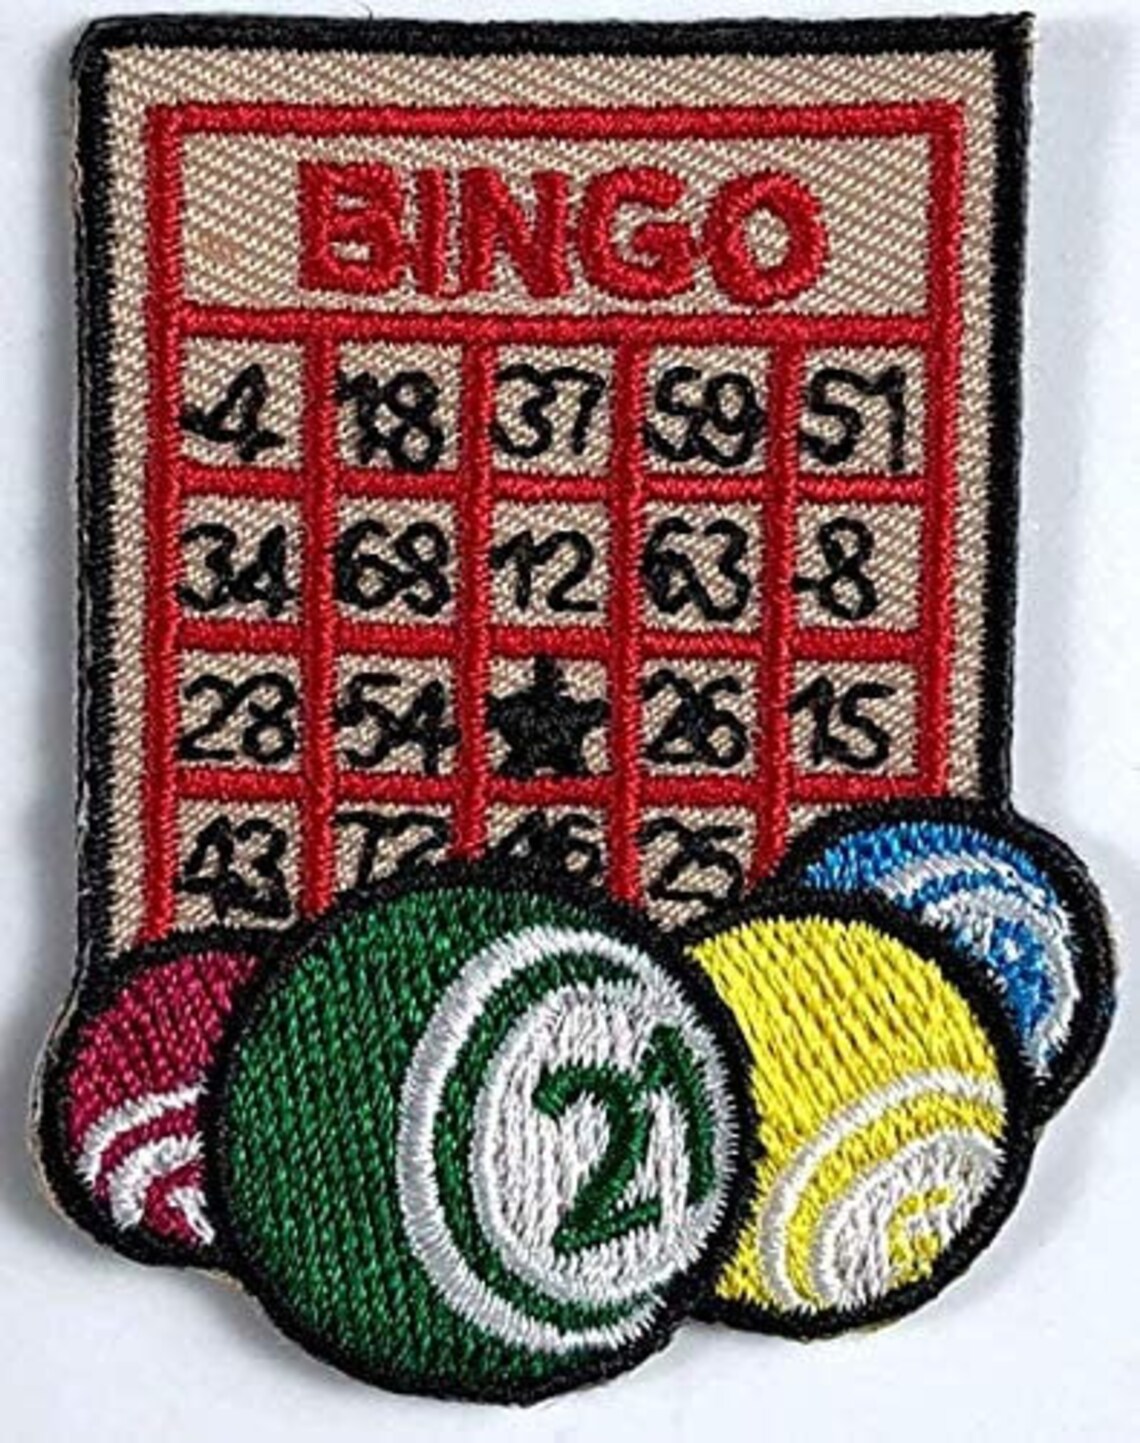 Bingo Embroidered Sew or Iron-On Patch 1 1/2 x 2 inch | Etsy